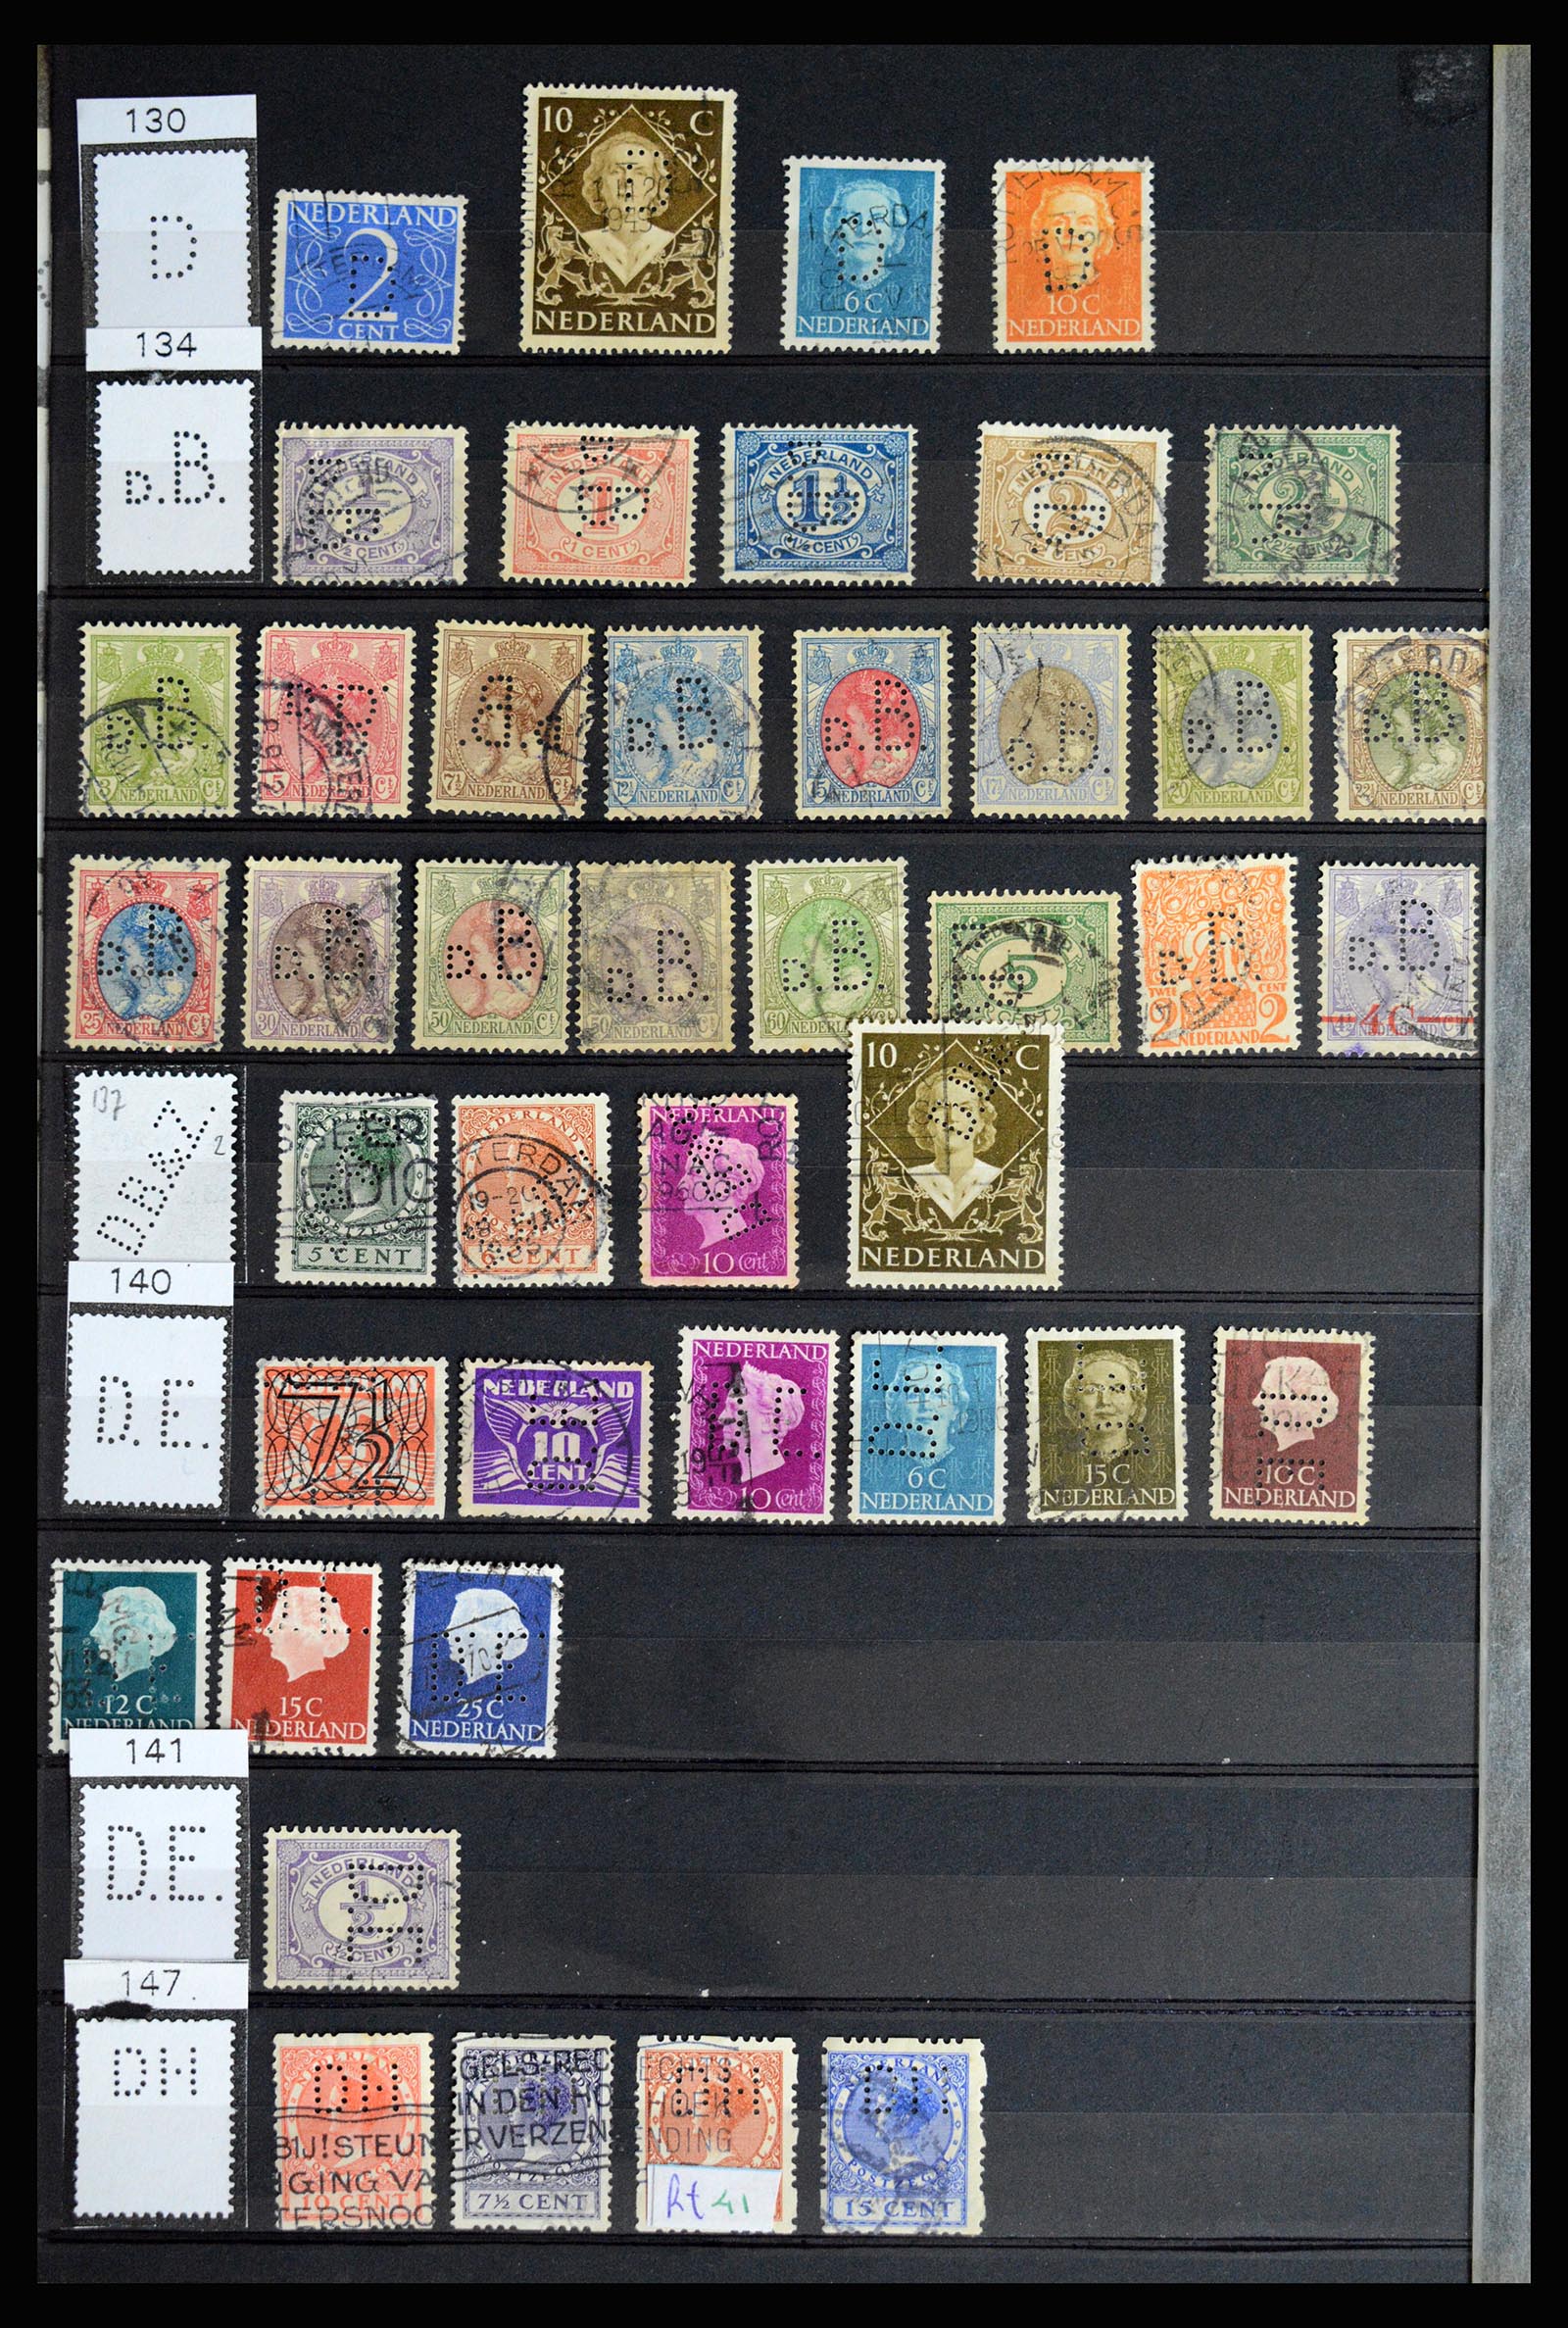 36849 050 - Stamp collection 36849 Netherlands perfins 1891-1960.